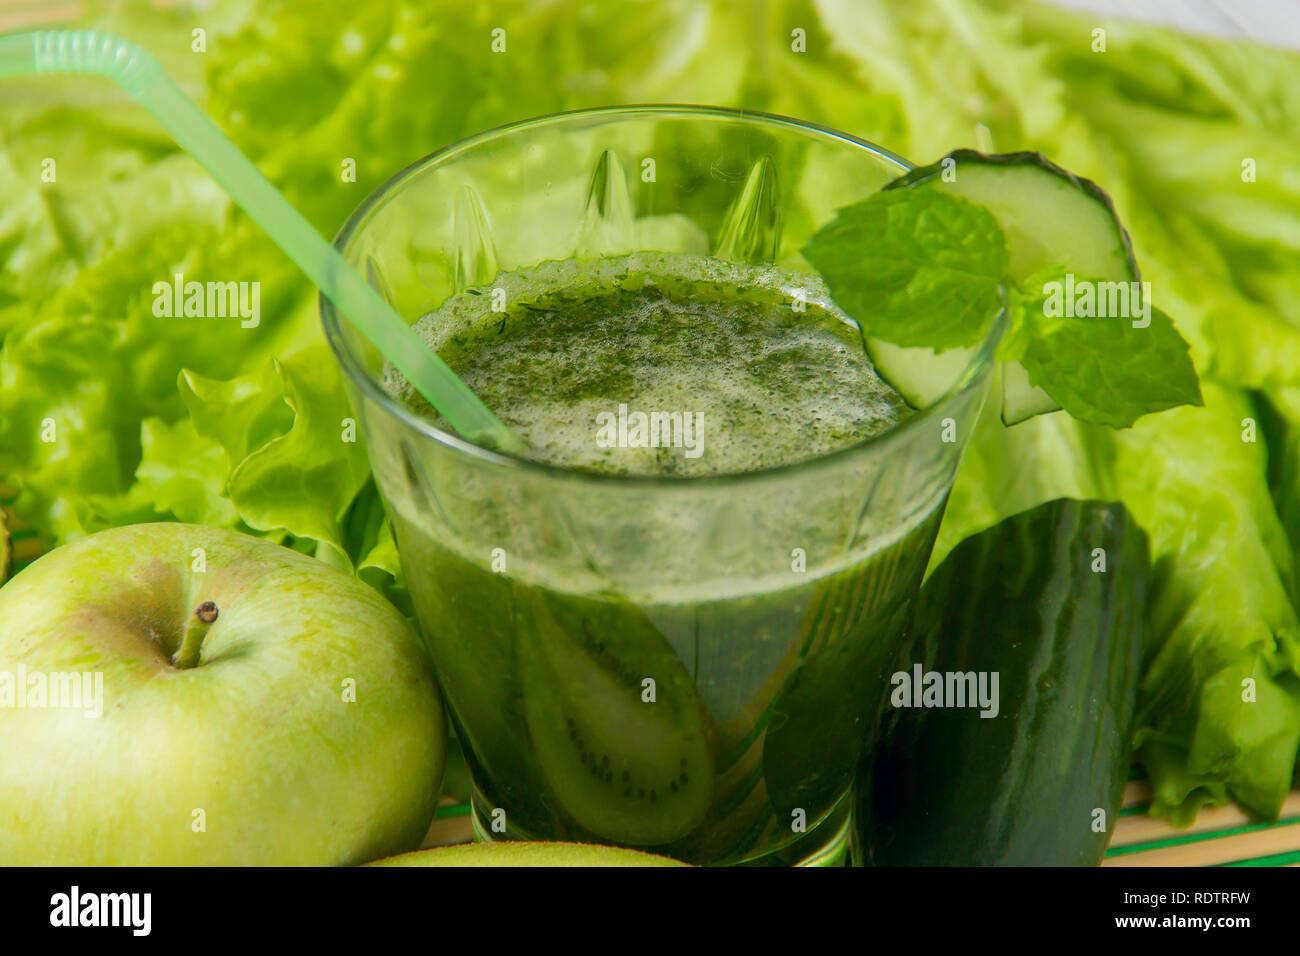 Healthy green smoothie with ingredients on wooden background. Stock Photo